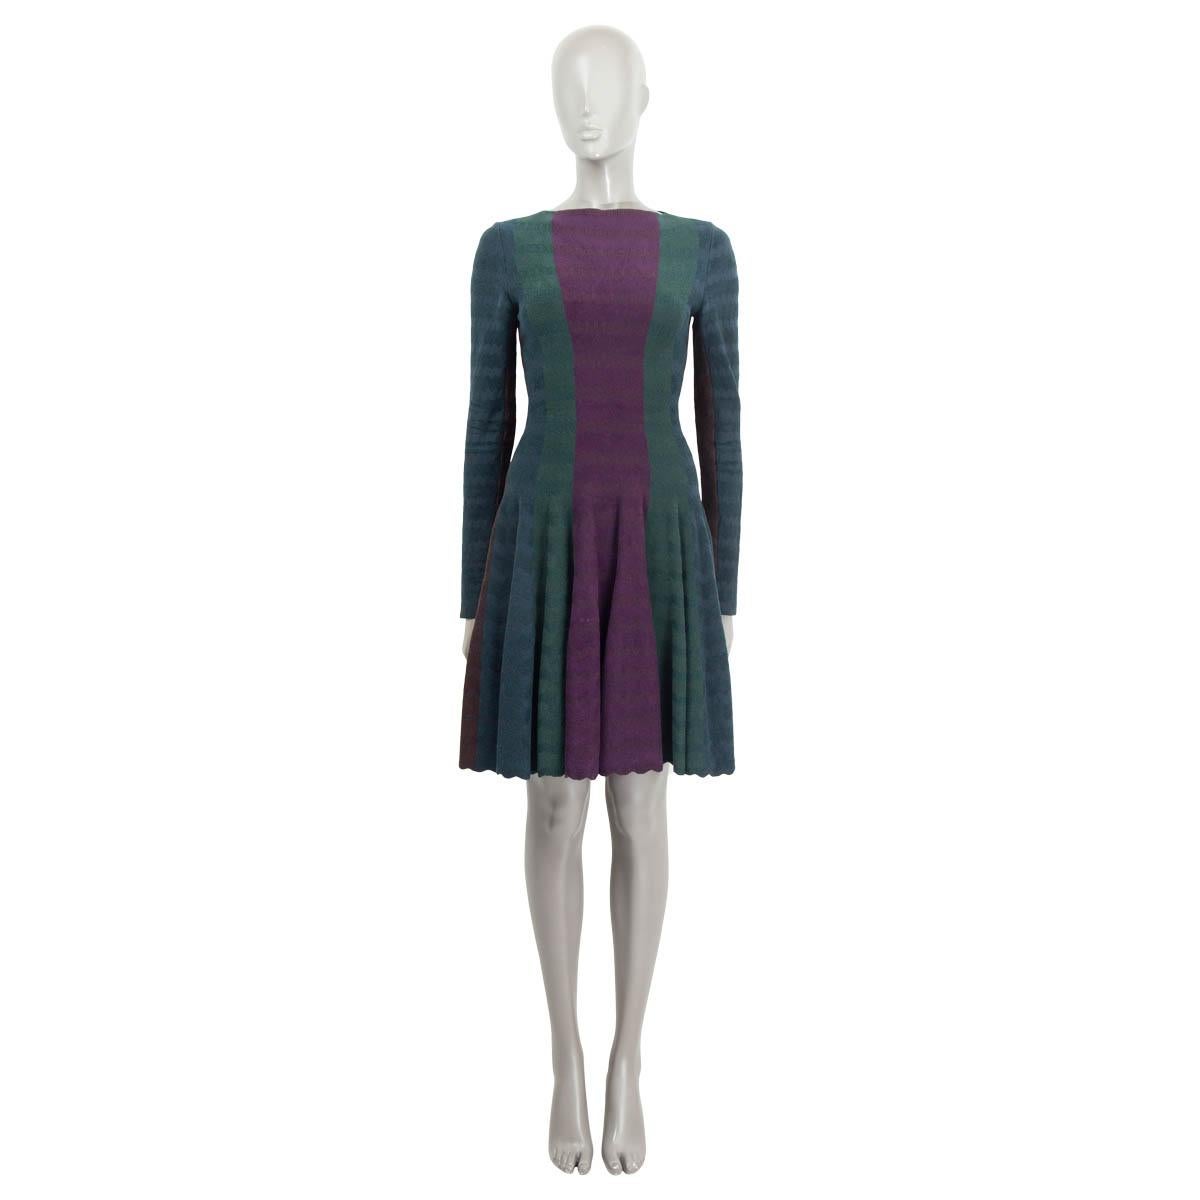 100% authentic Alaïa long-sleeve flared color block dress in espresso brown, eggplant, forest green, petrol and black viscose (55%), wool (20%), polyamide (20%) and elastane (5%). Opens with a zipper on the back. Unlined. Has been worn and is in